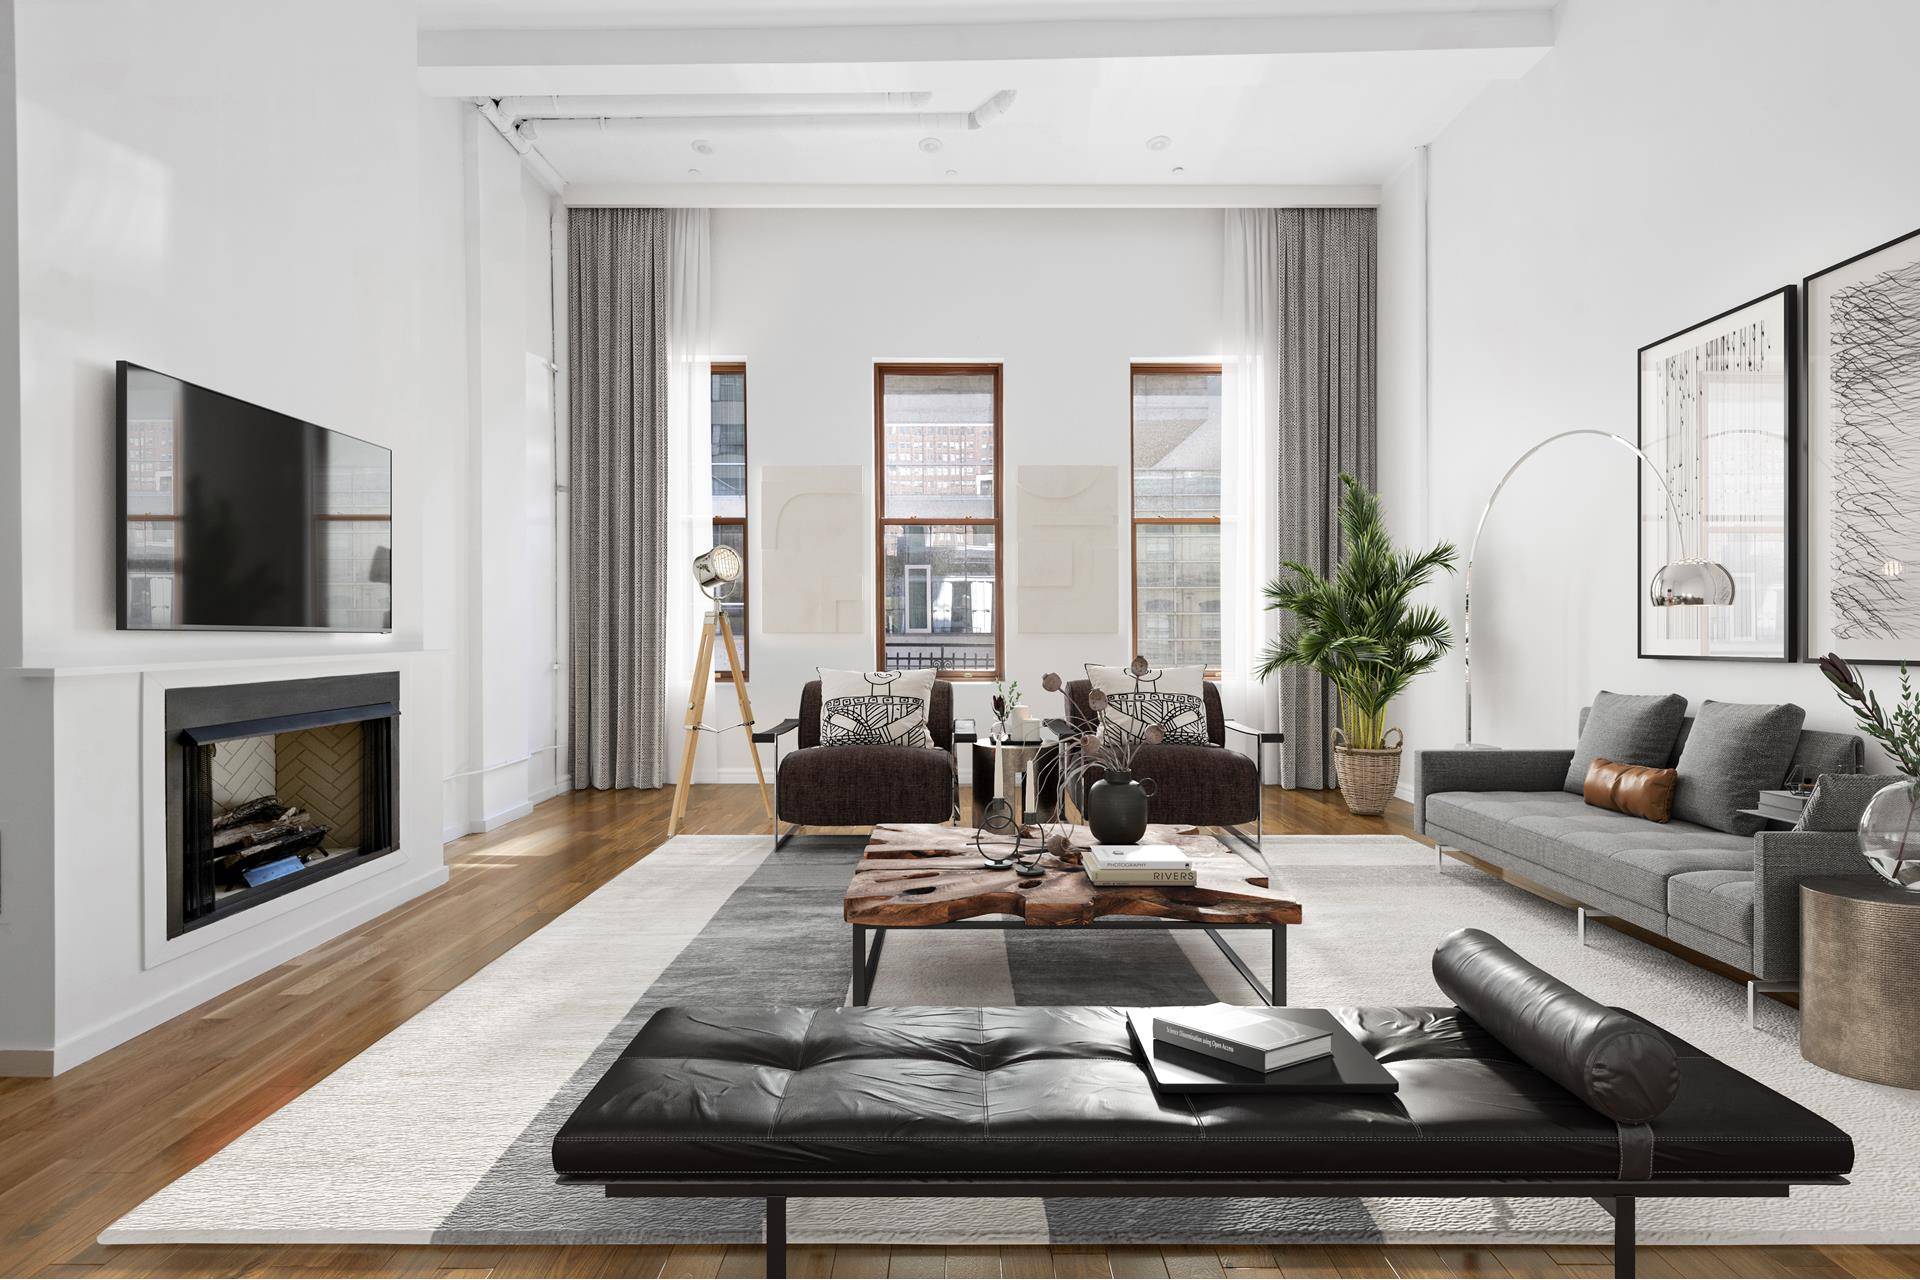 Endless possibilities for this grand 4, 544 square foot Tribeca Penthouse Loft.